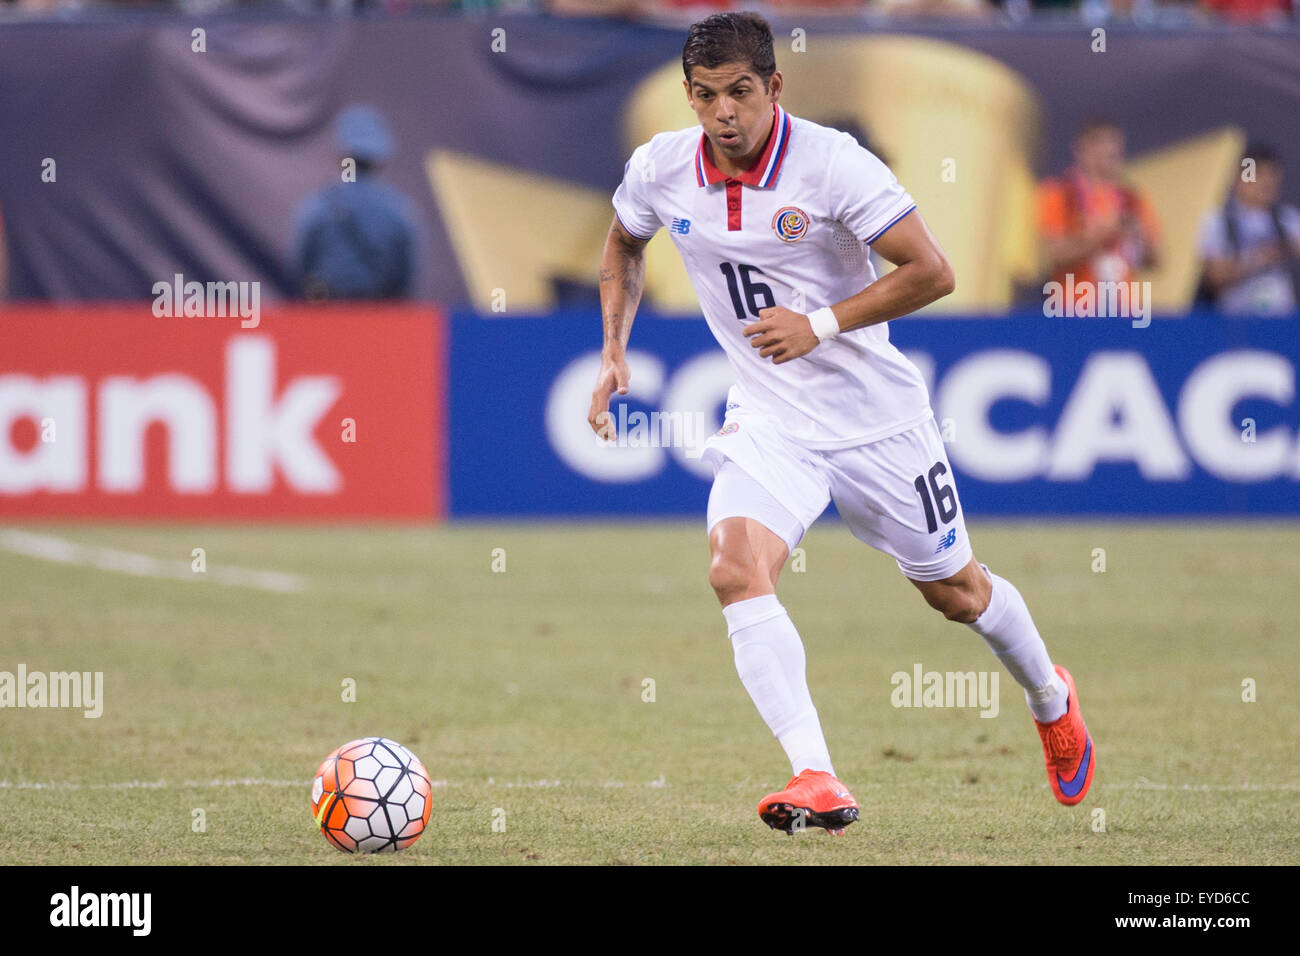 July 19, 2015: Costa Rica defender Christian Gamboa (16) in action during the CONCACAF Gold Cup 2015 Quarterfinal match between the Costa Rica and Mexico at MetLife Stadium in East Rutherford, New Jersey. Mexico won 1-0. (Christopher Szagola/Cal Sport Media) Stock Photo